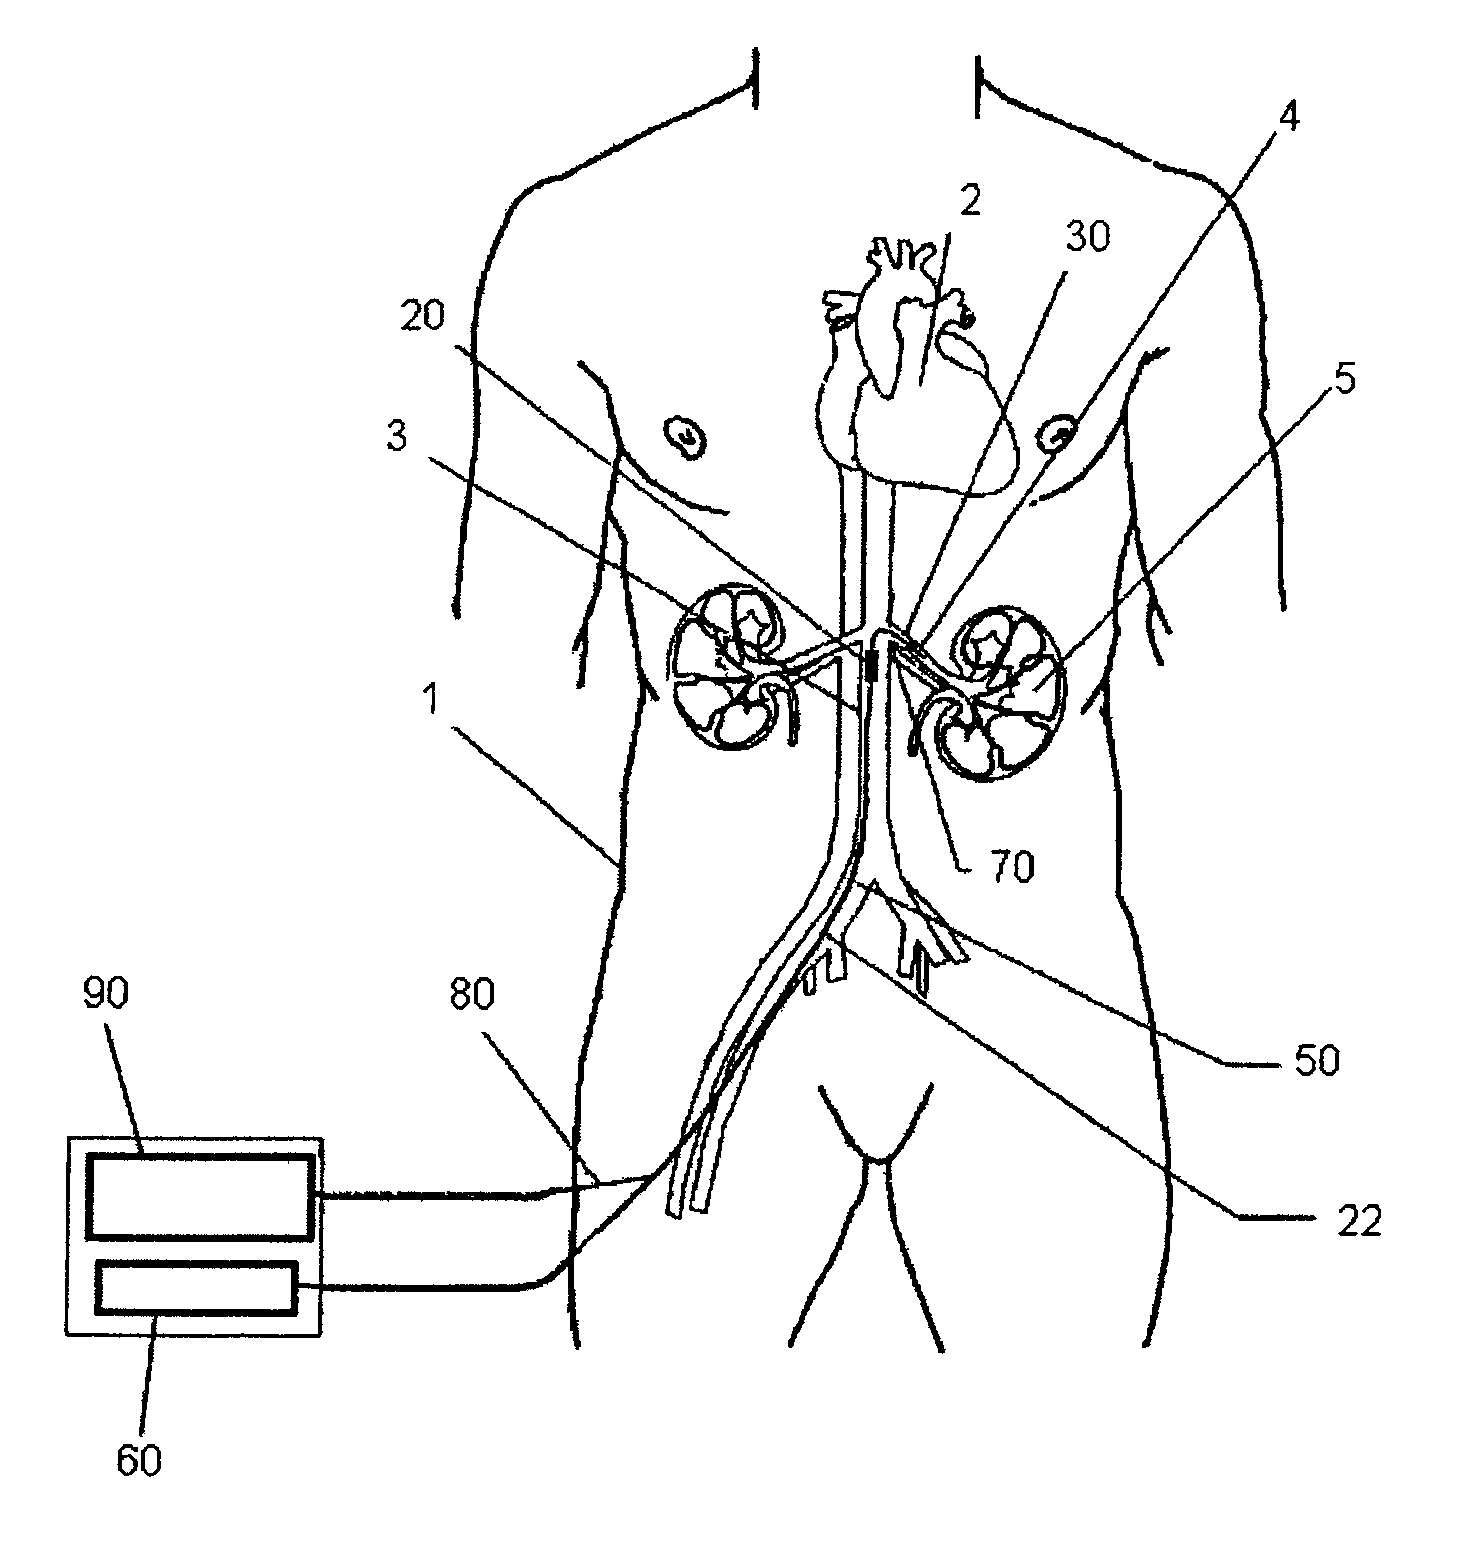 Method and apparatus for treatment of congestive heart disease